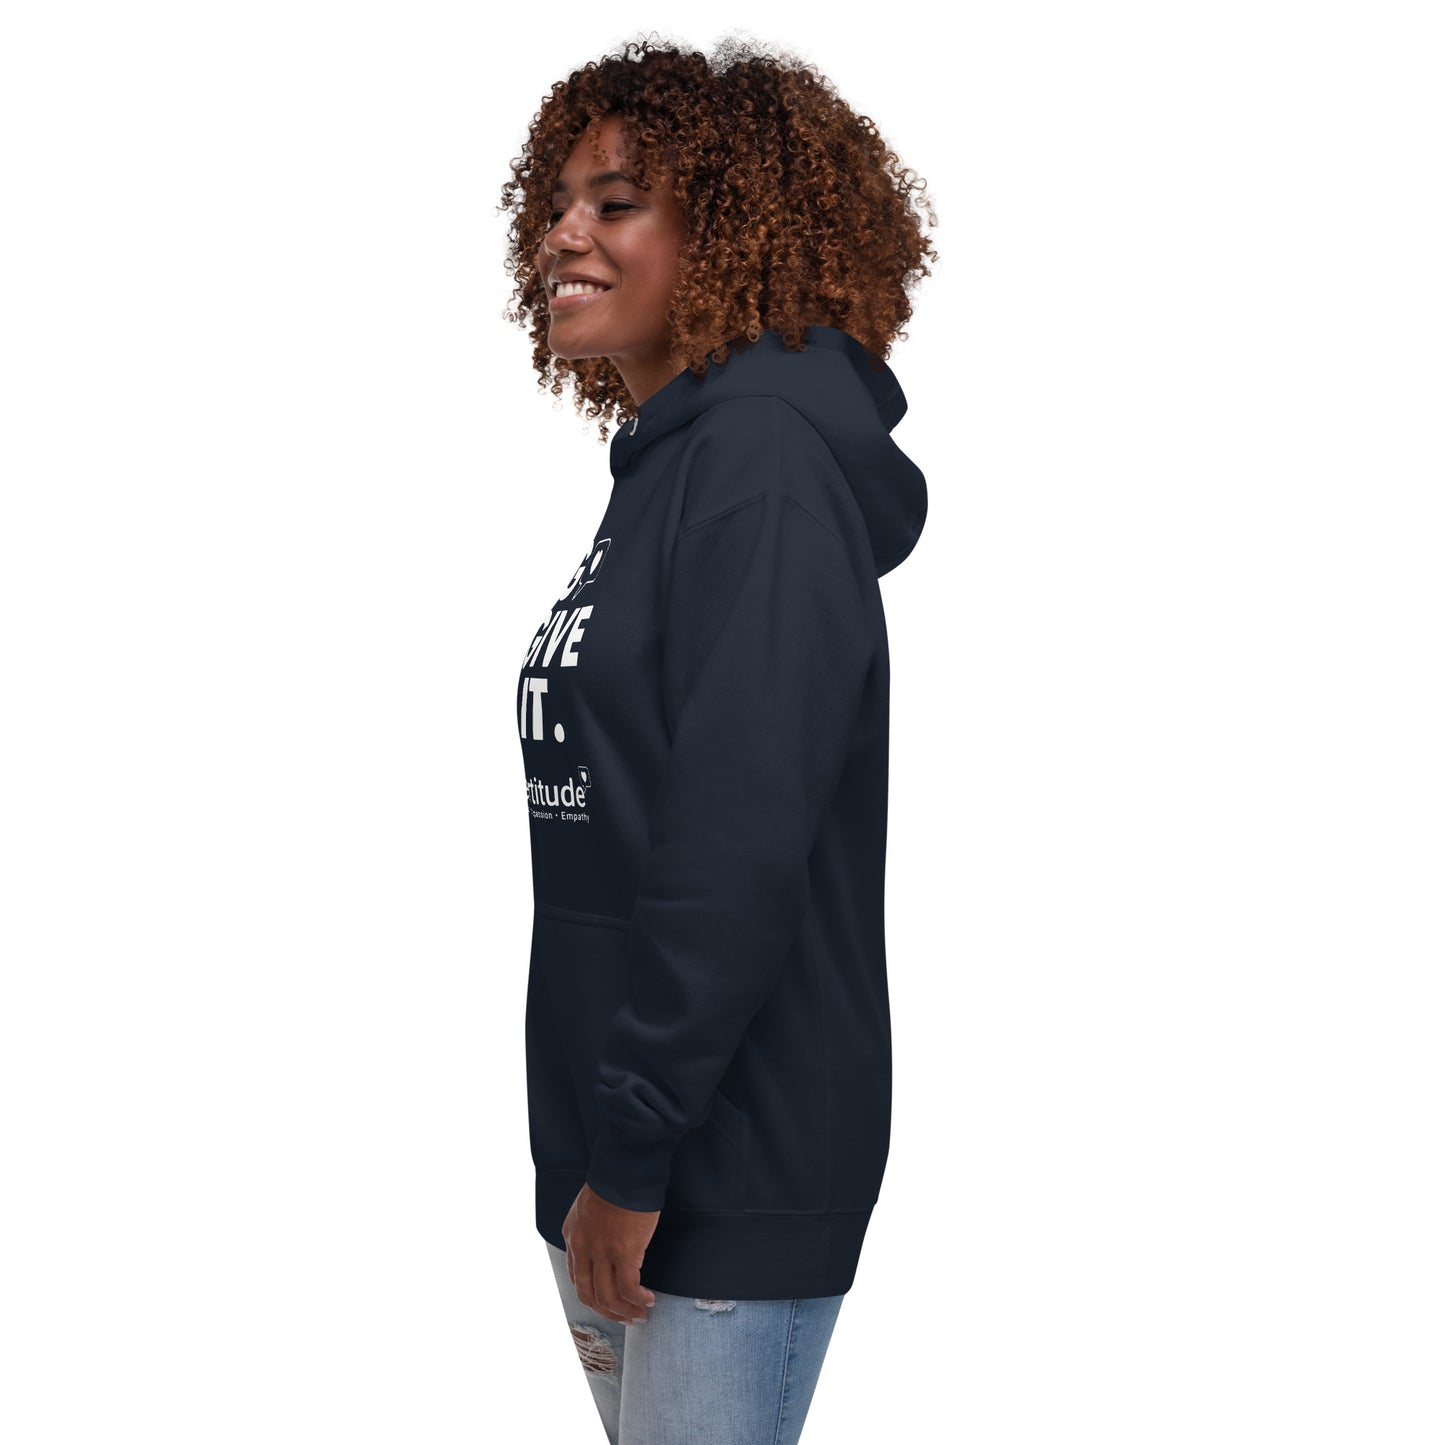 Go Give It Unisex Hoodie (50% to charity)